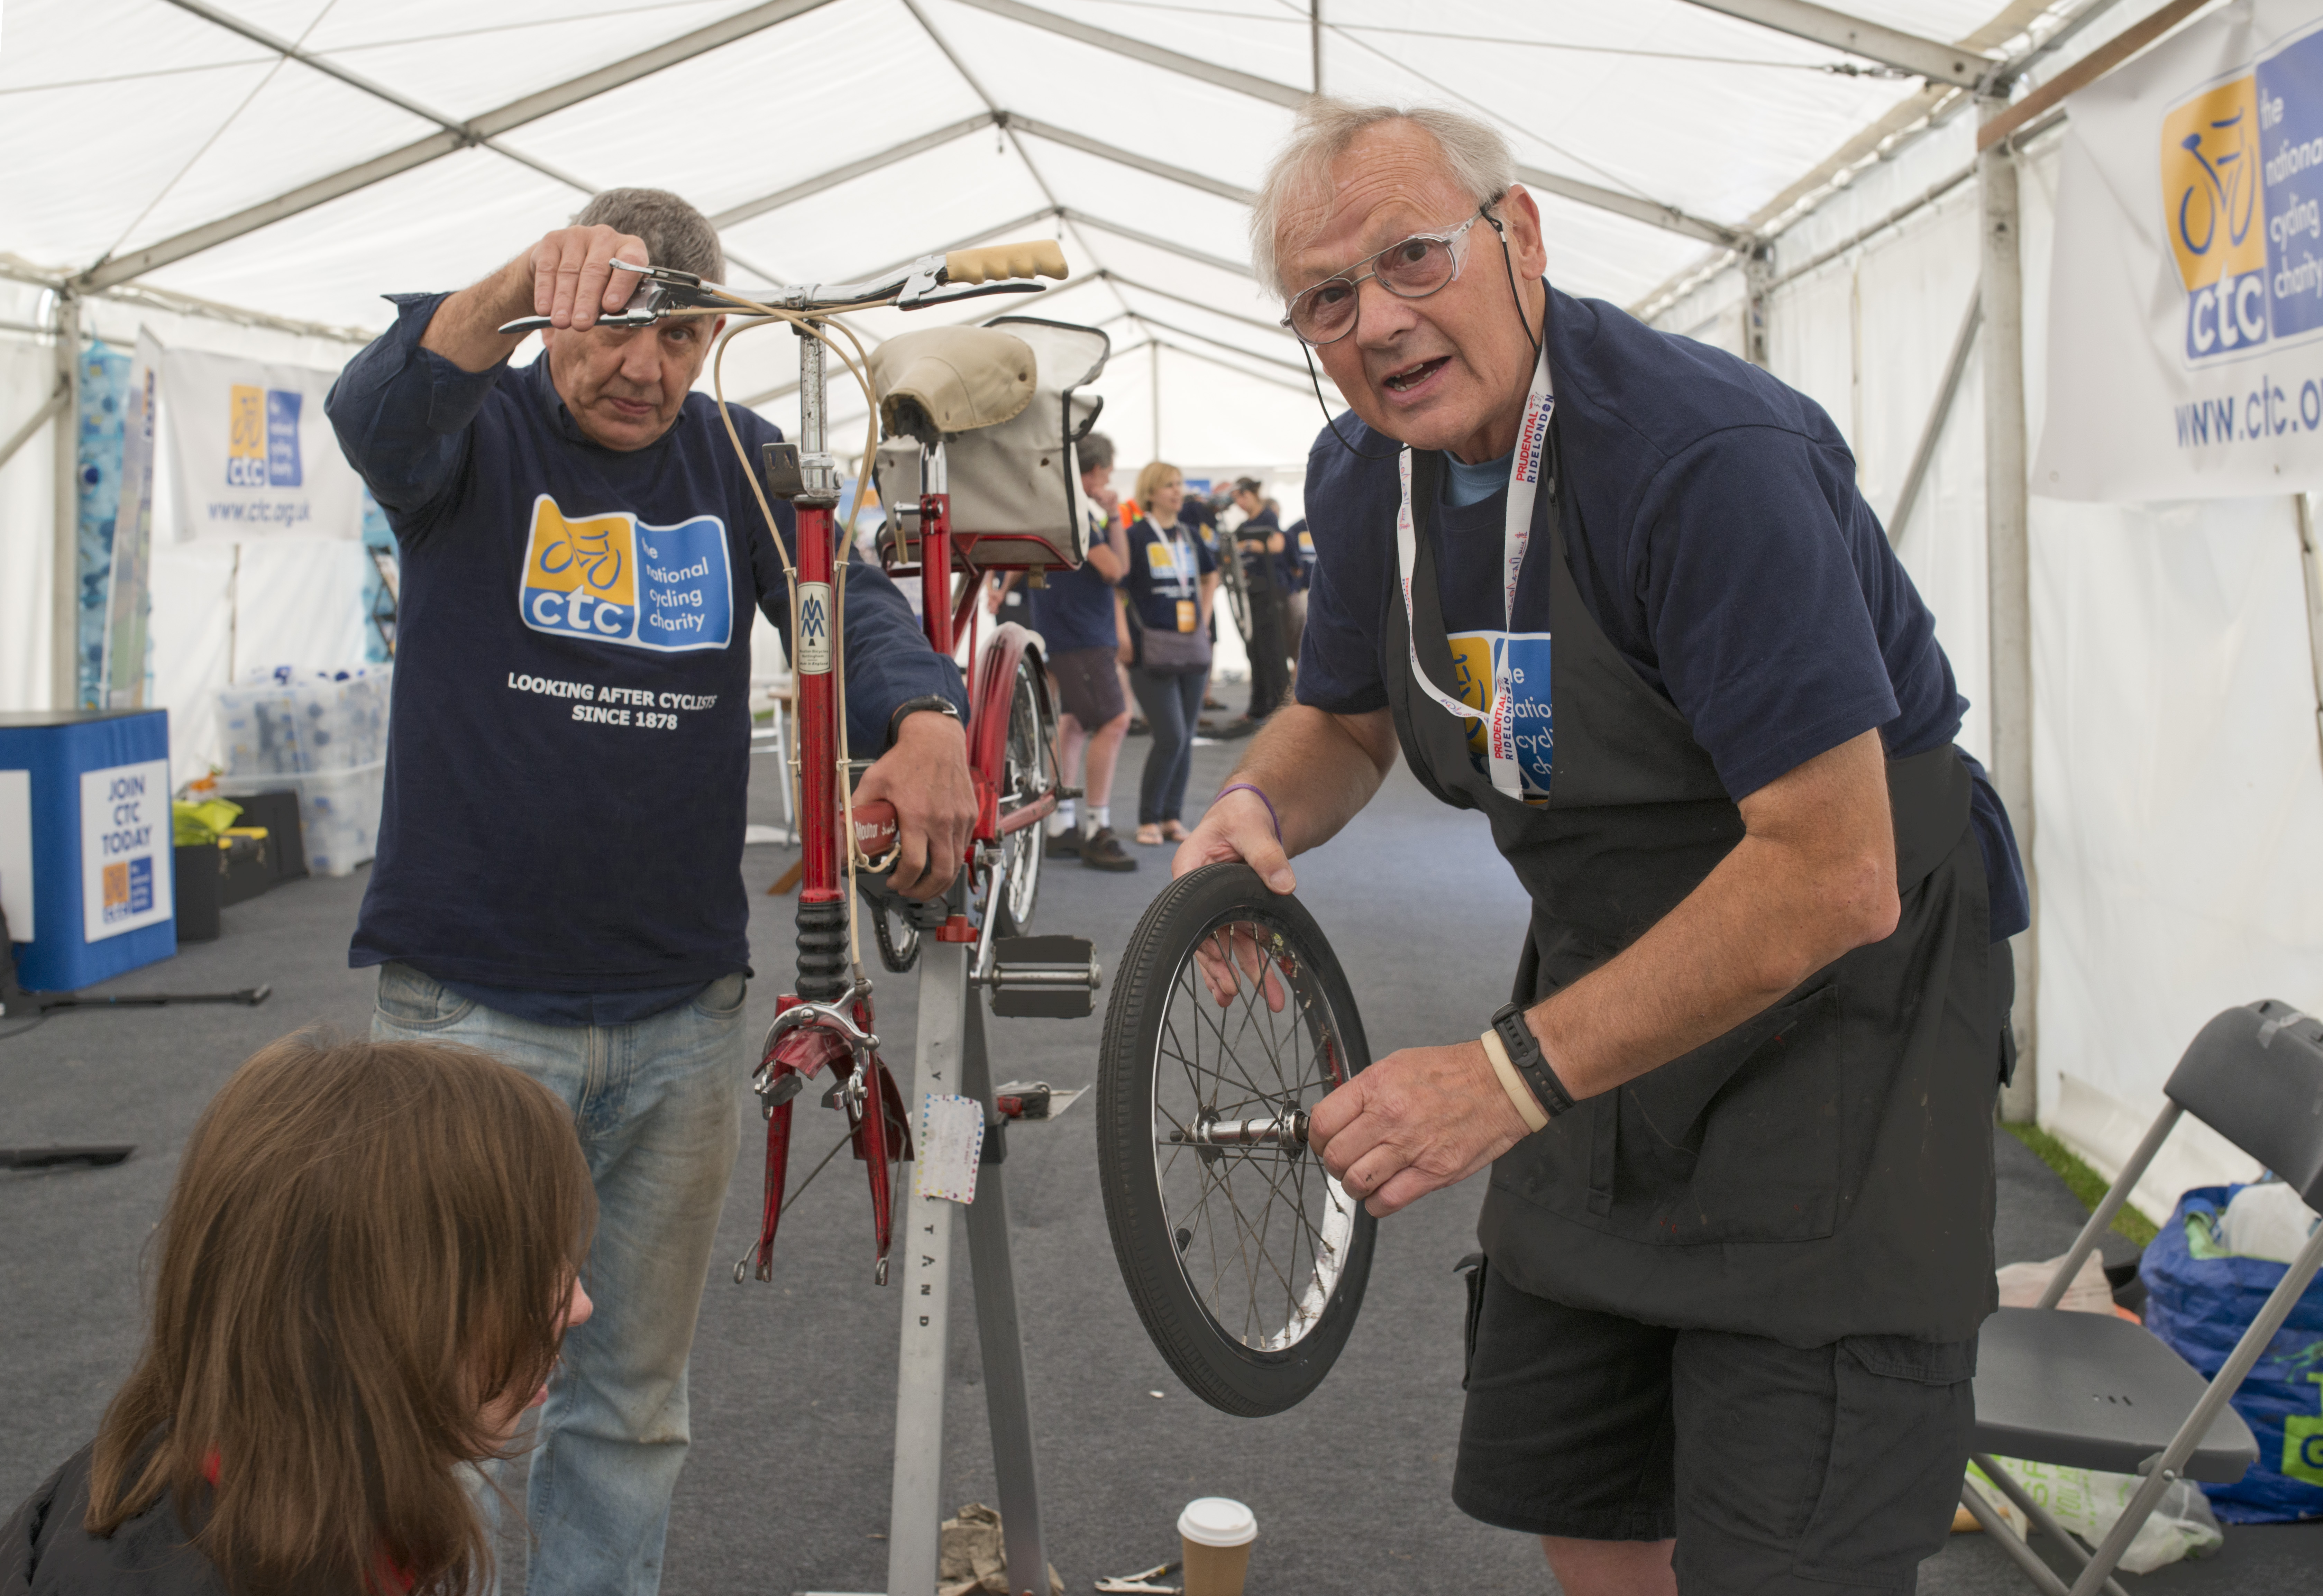 Our fantastic volunteers helped to get stacks of bikes fixed